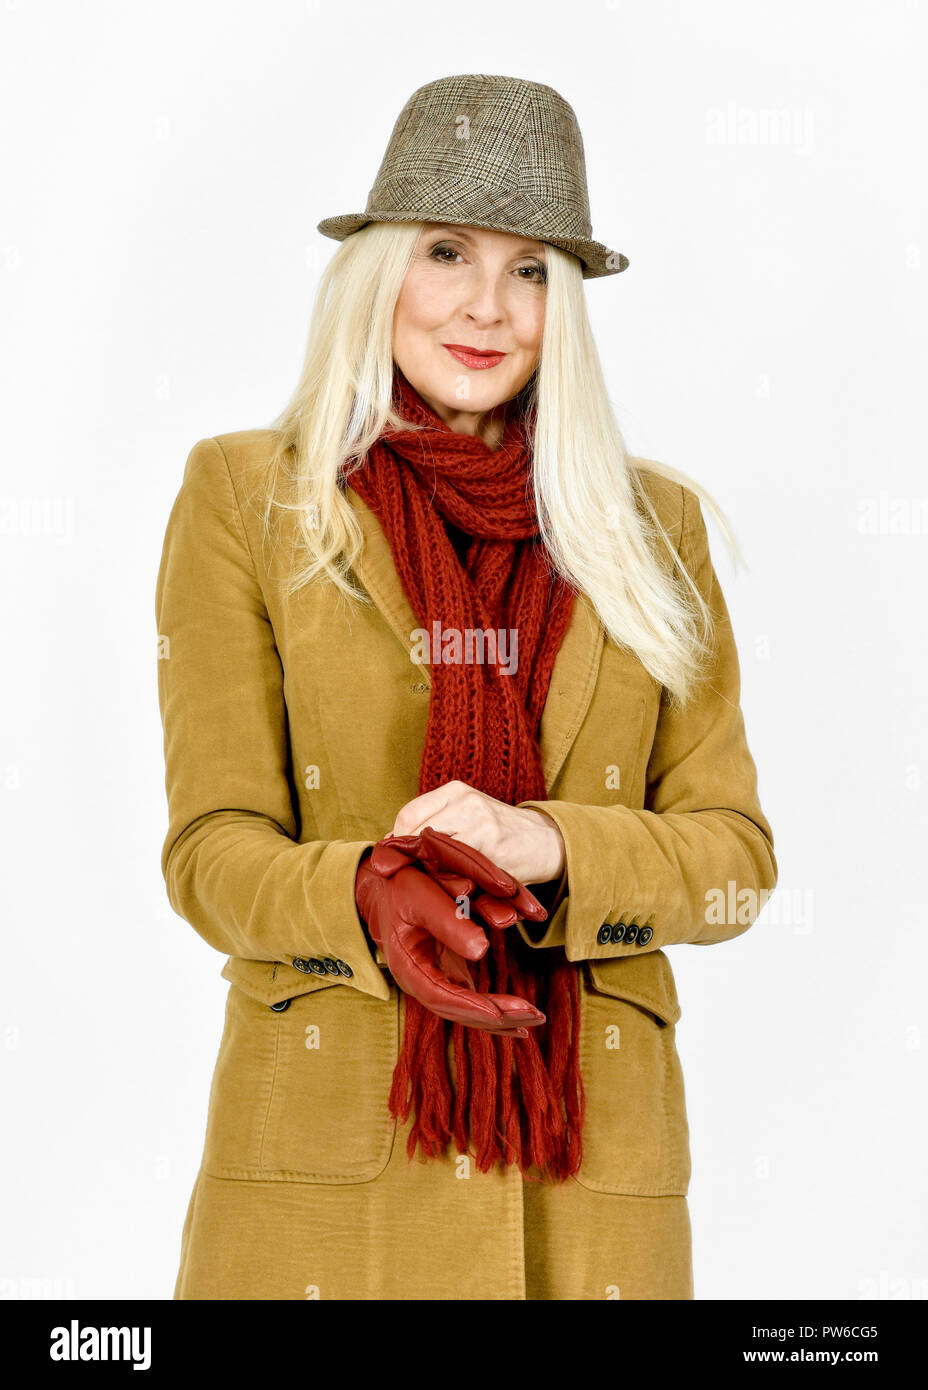 Attractive Caucasian woman in winter clothing putting a red pair of gloves on Stock Photo